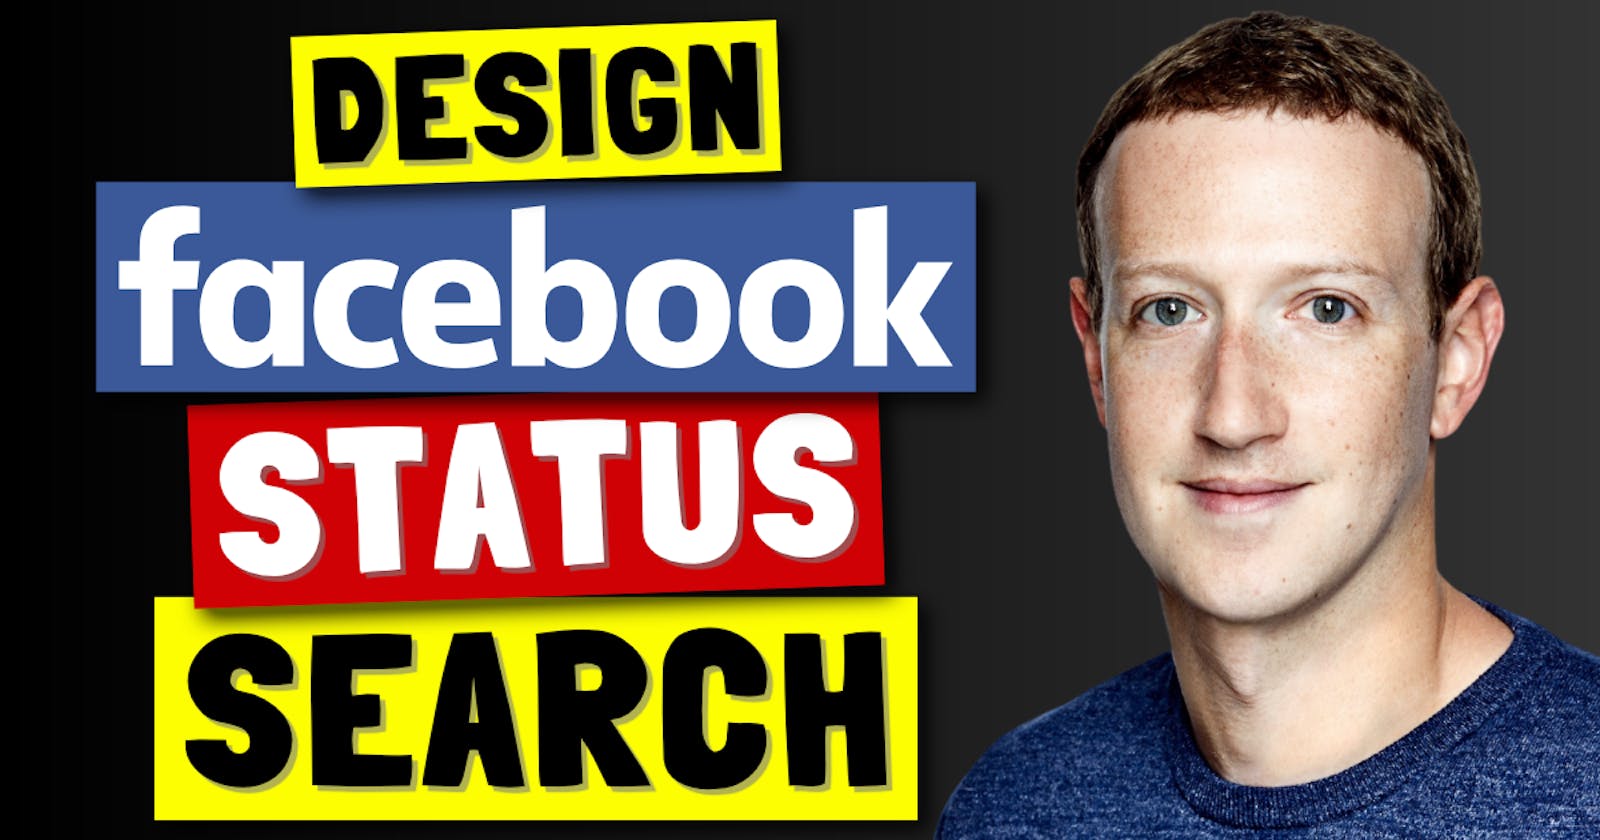 Design Facebook Status Search | Twitter Search | System Design & Architecture